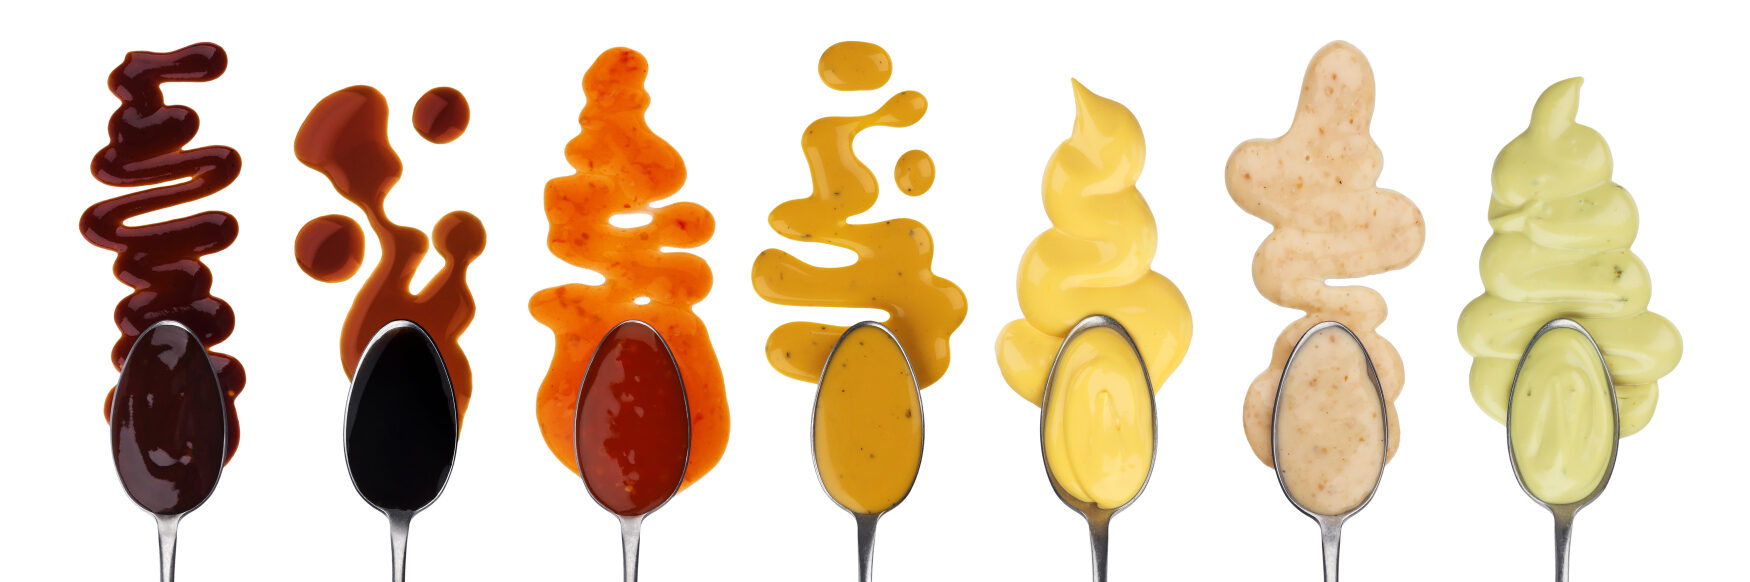 soy sauce, sriracha, and other sauces in spoons